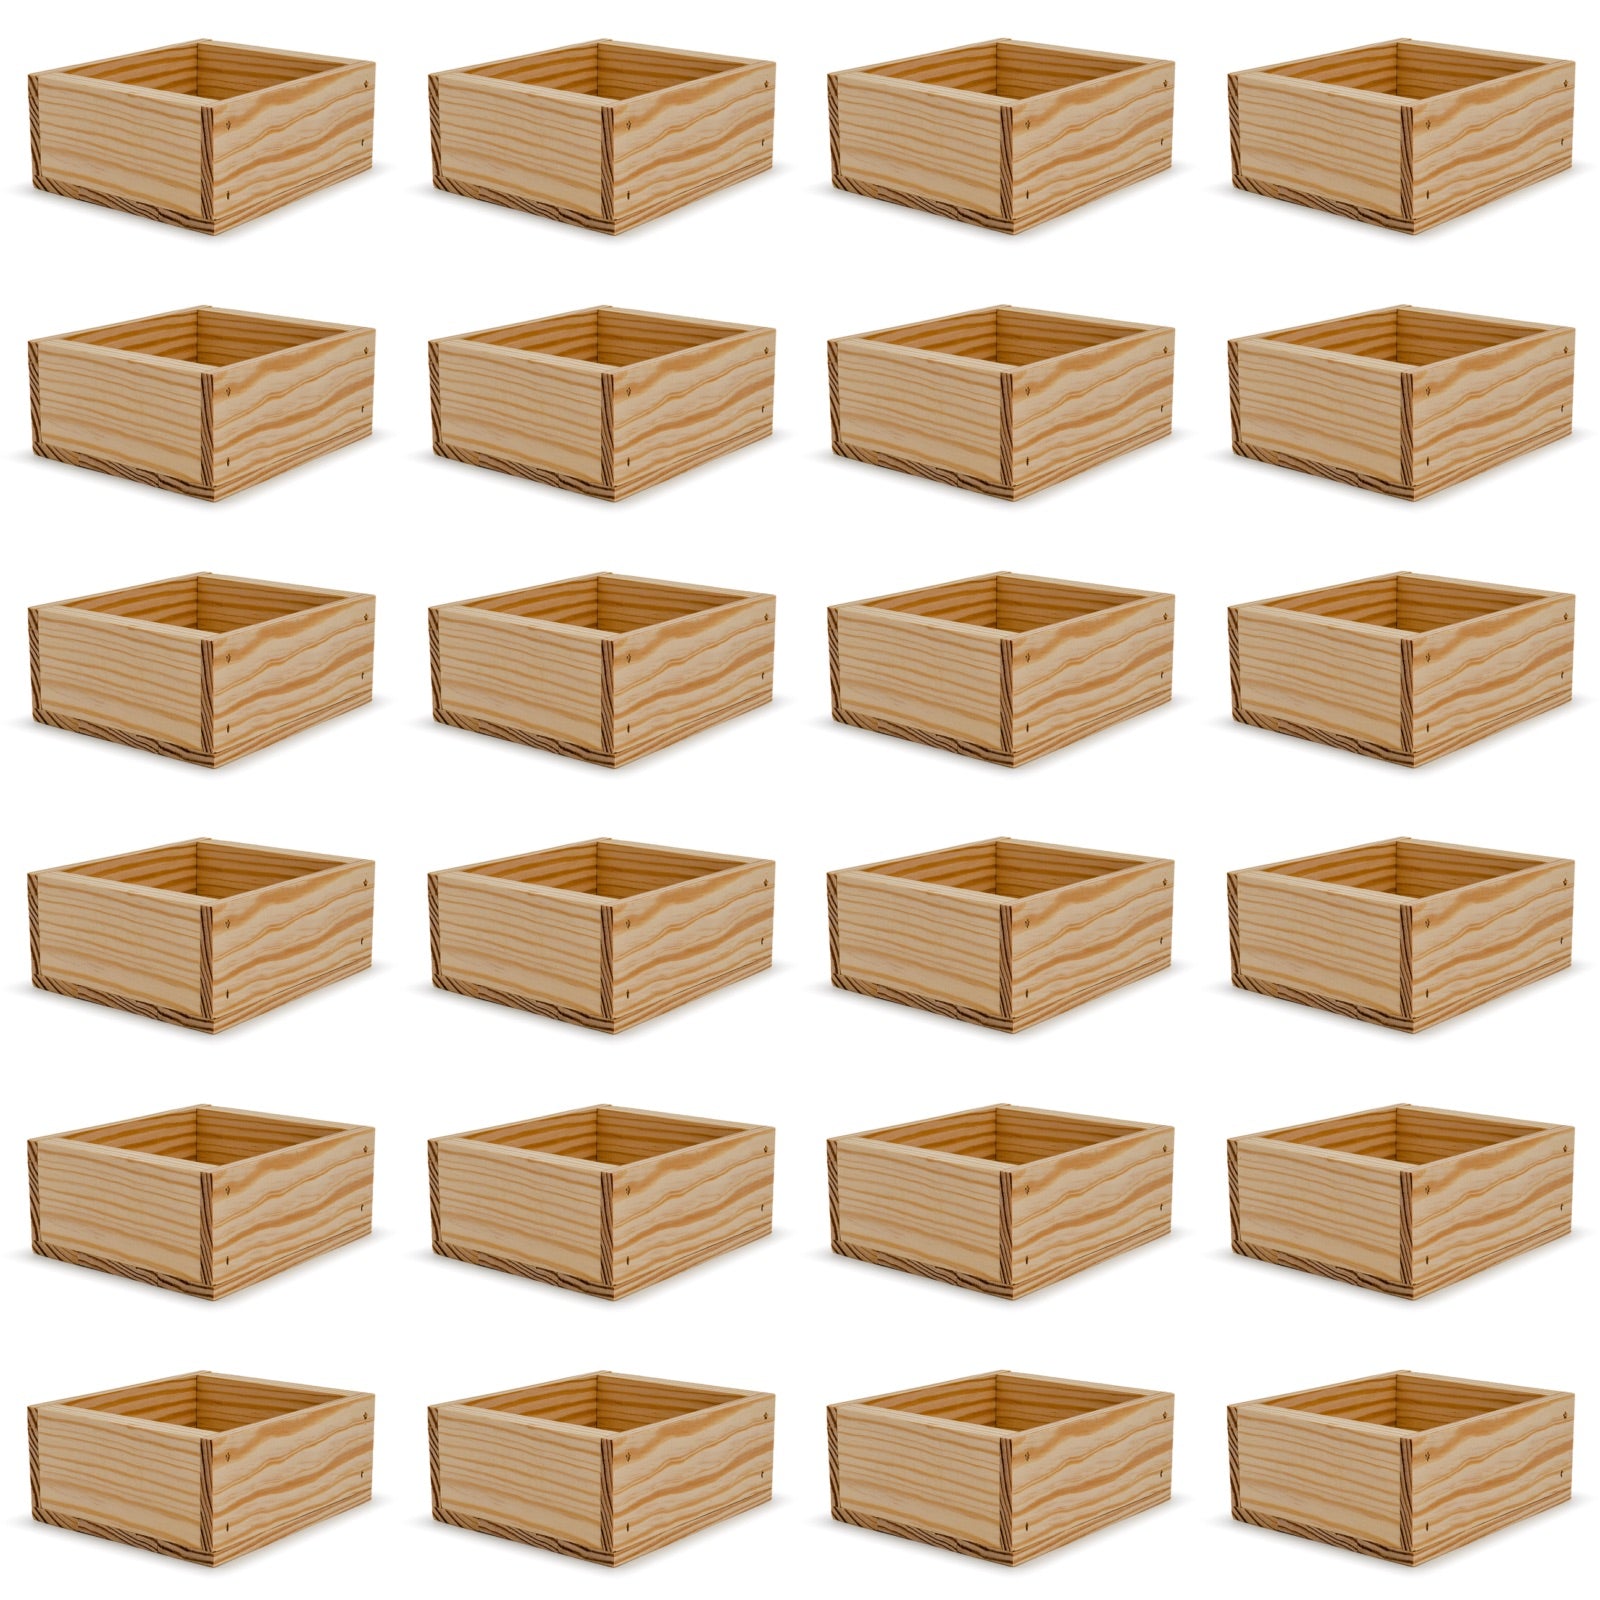 24 Small wooden crates 6x5.5x2.75